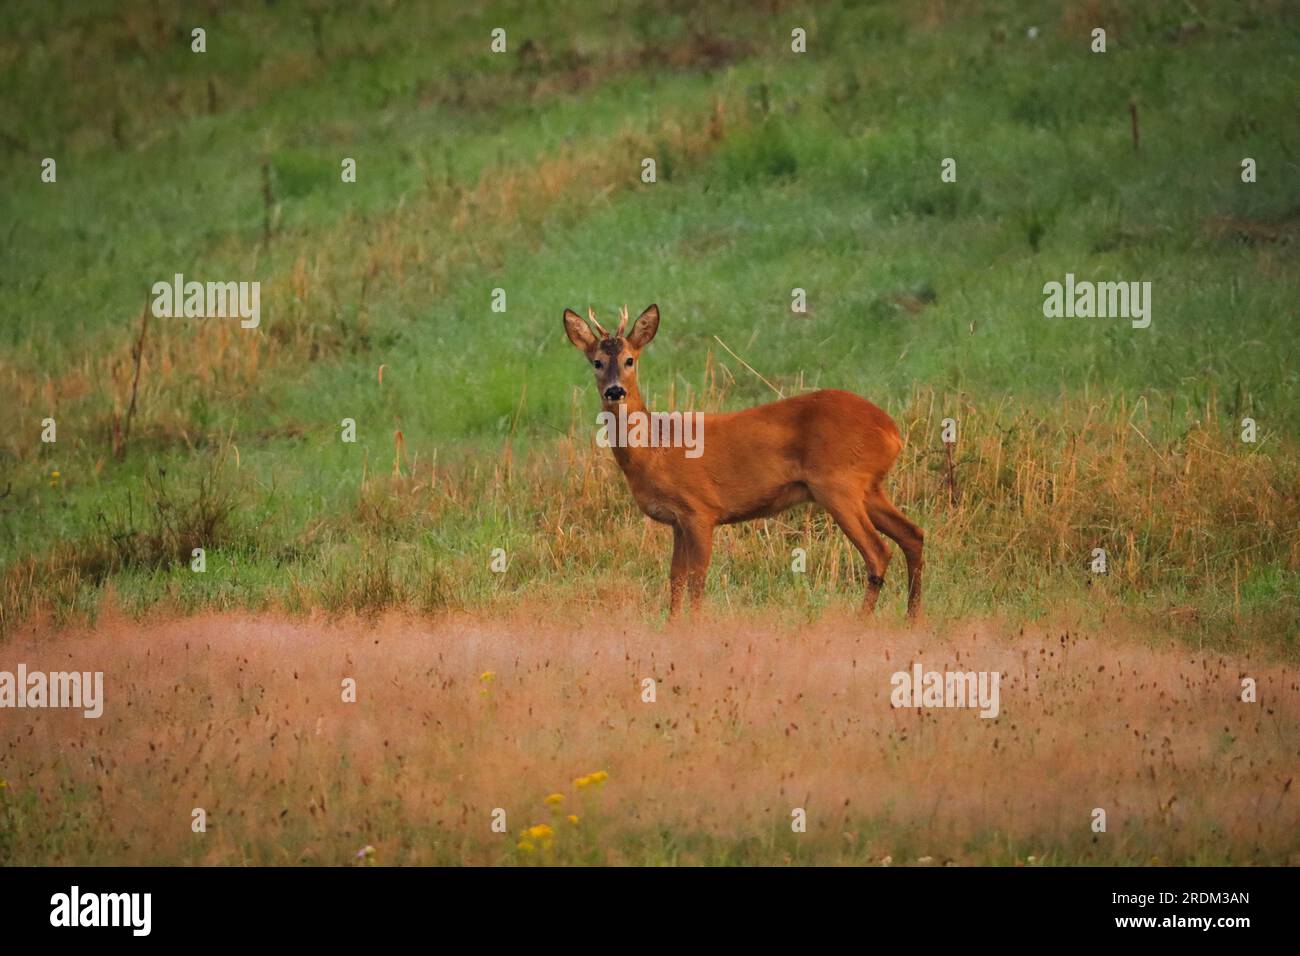 a young roebuck standing in the fields and starring into camera, wildlife deer in nature Stock Photo